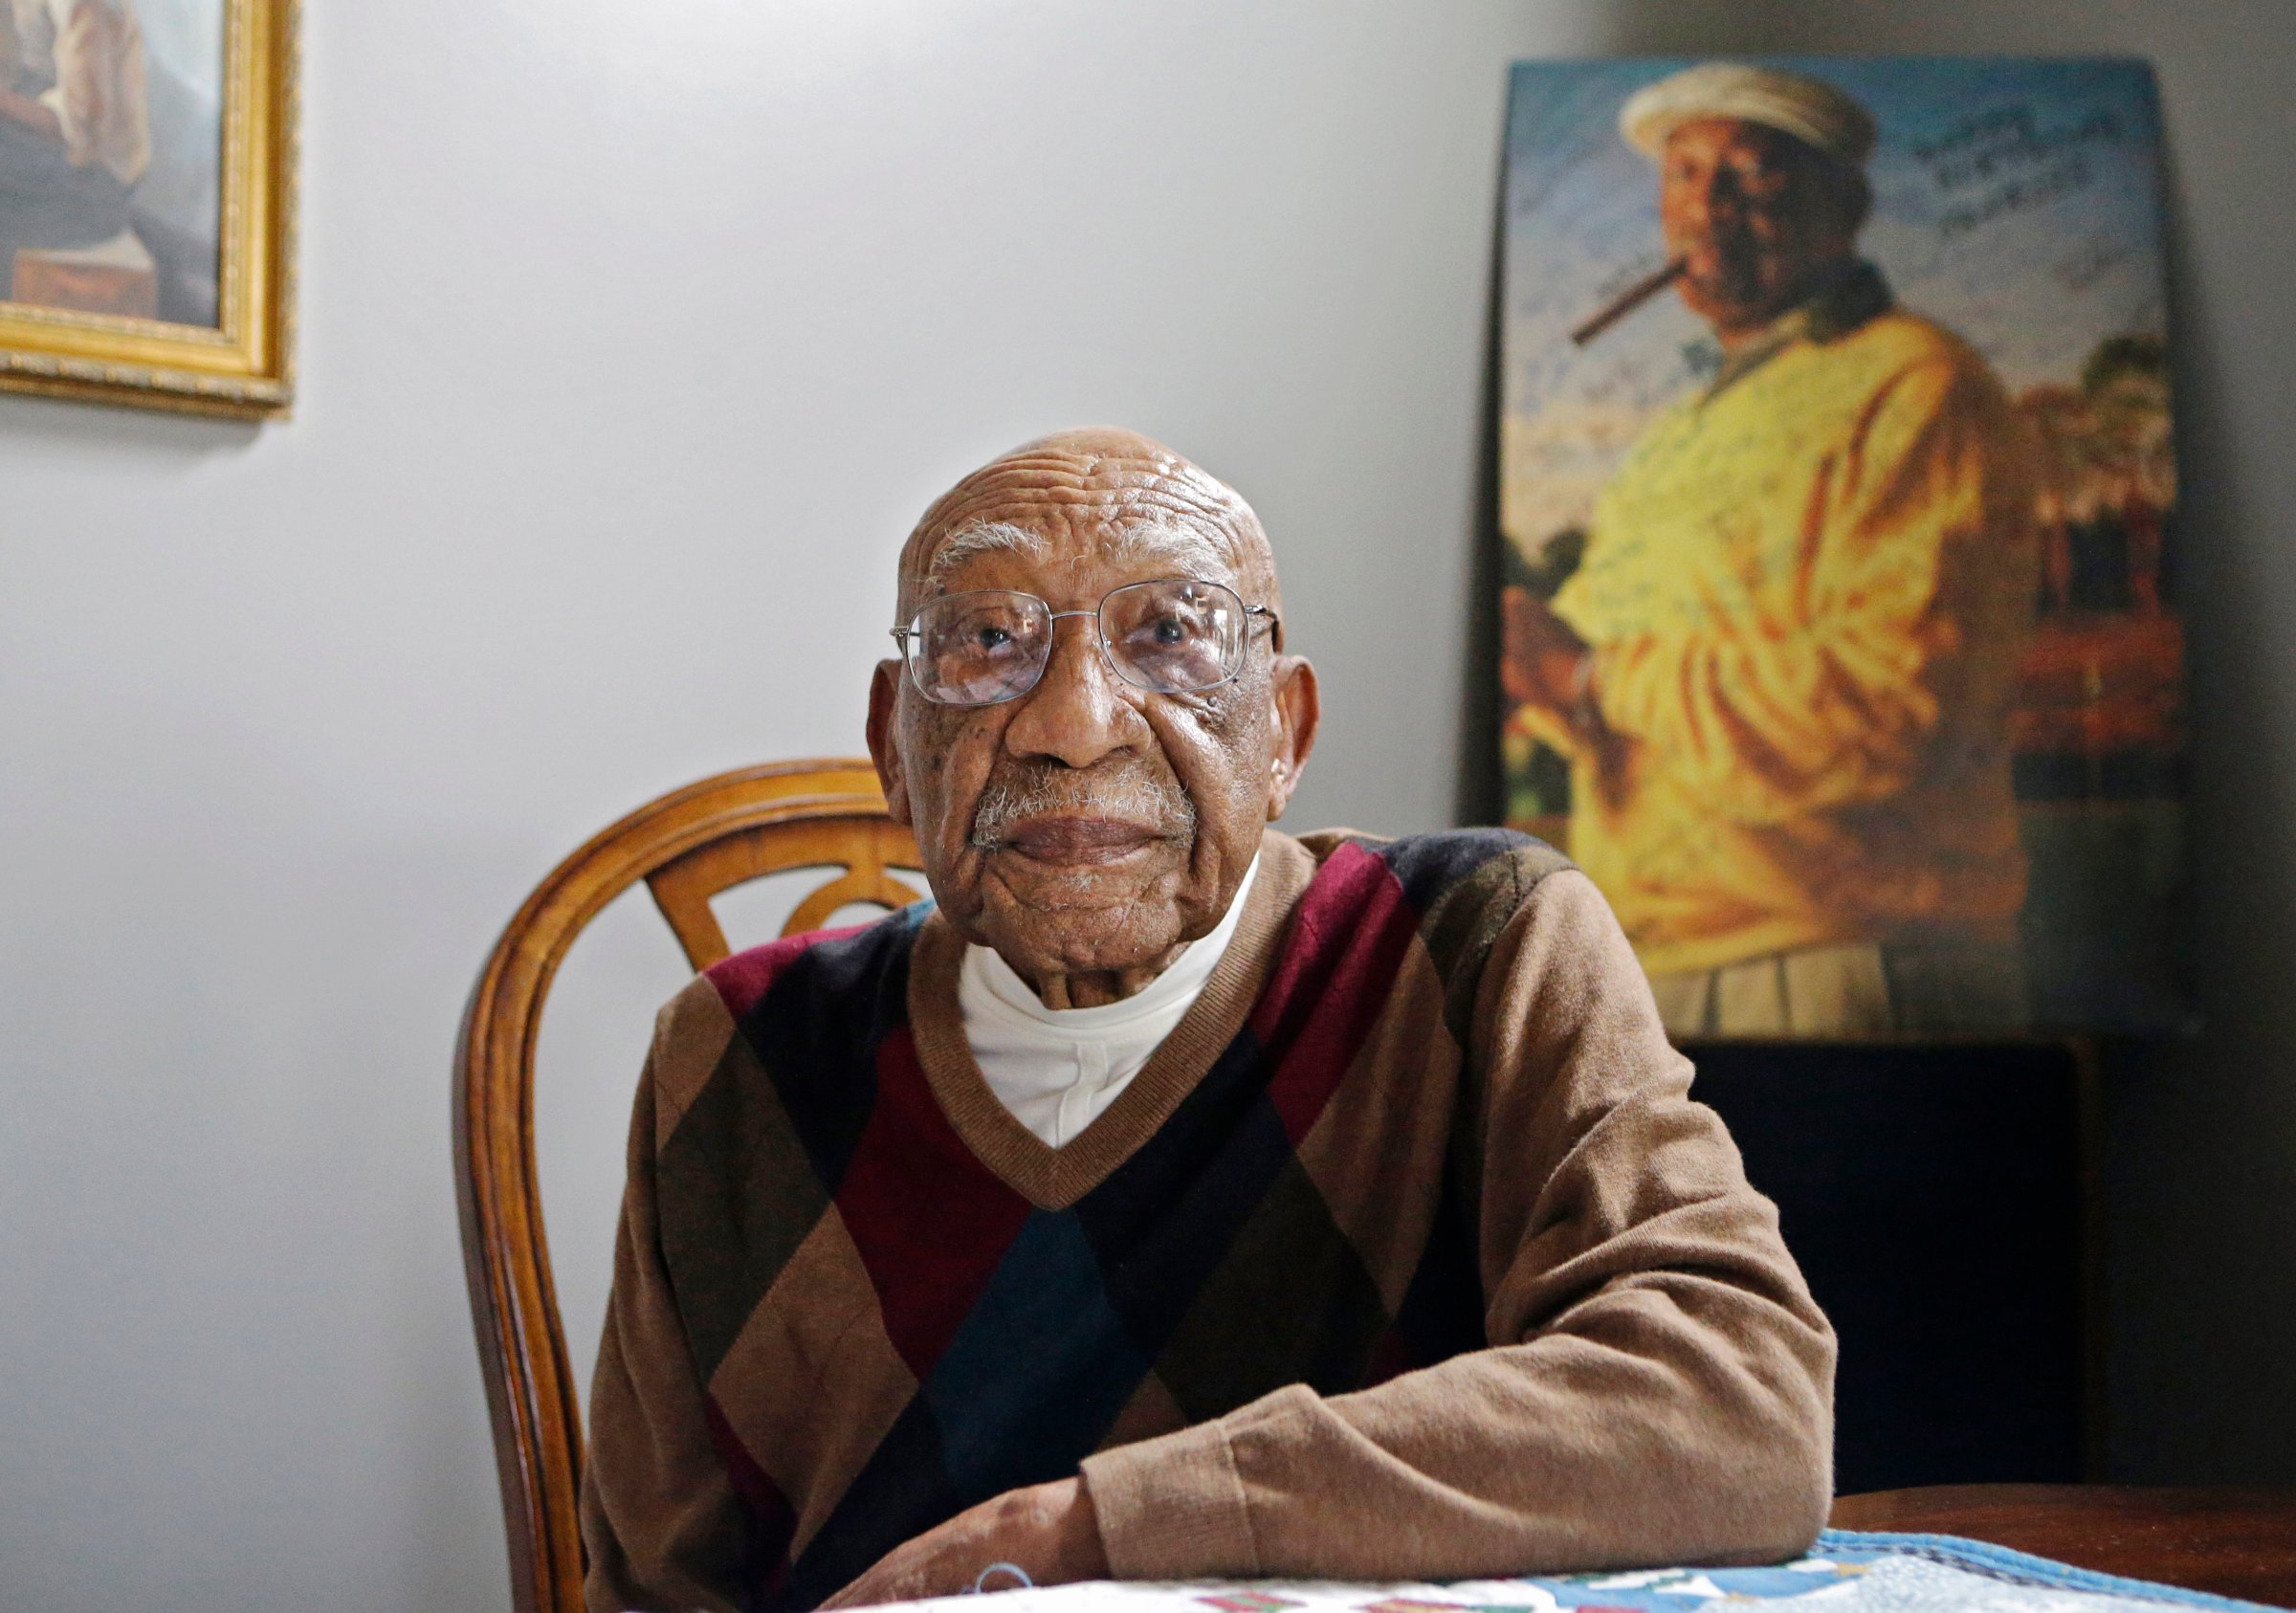 Former PGA golfer Charlie Sifford sits in the dining room of his home in Brecksville, Ohio on Nov. 13, 2014